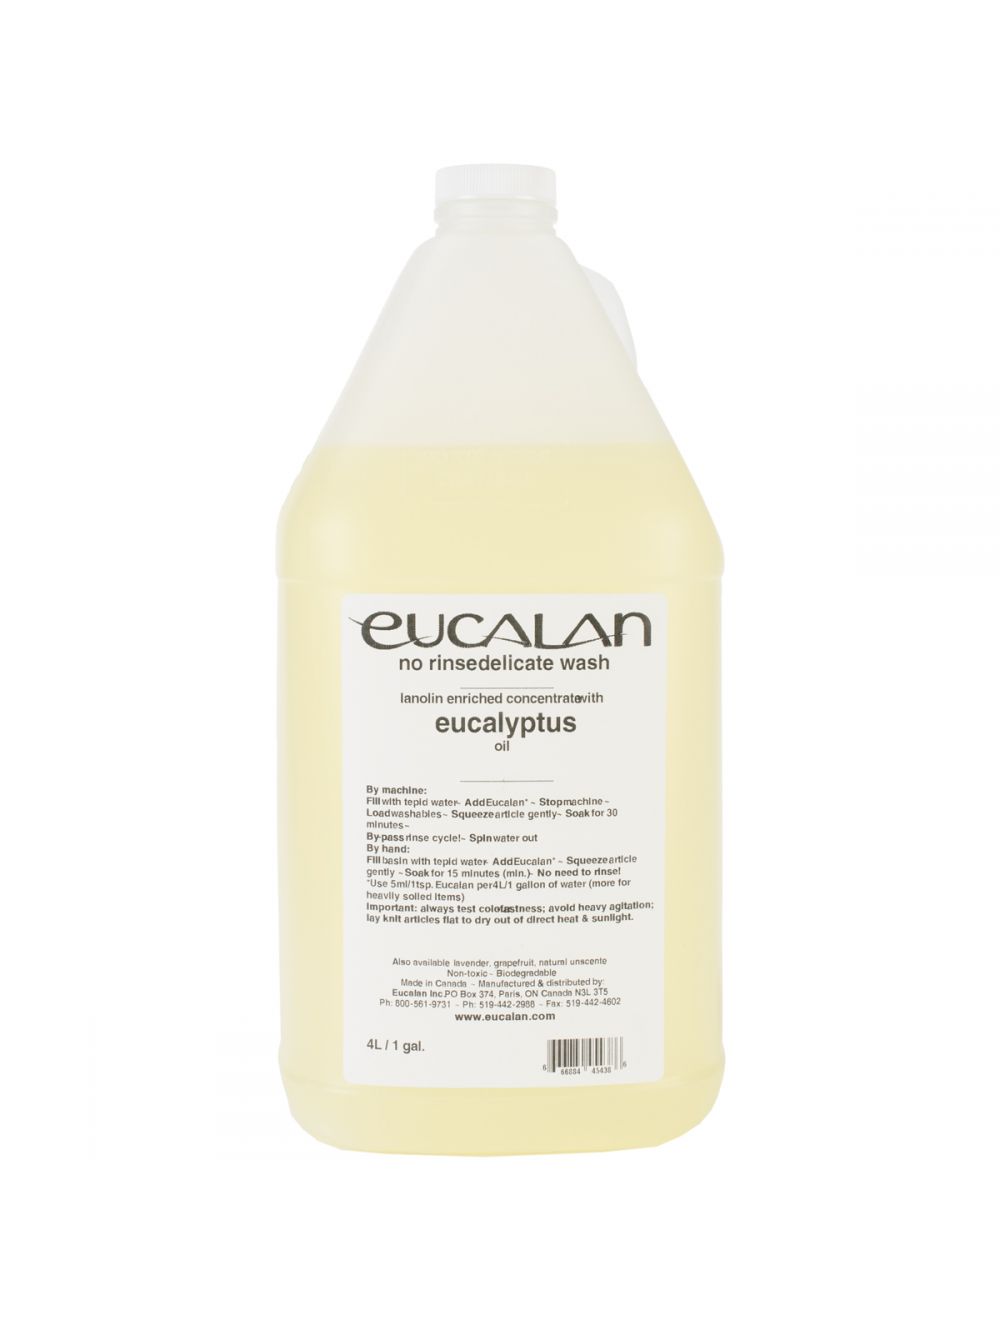 Eucalan Fine Fabric Wash 1gal Unscented